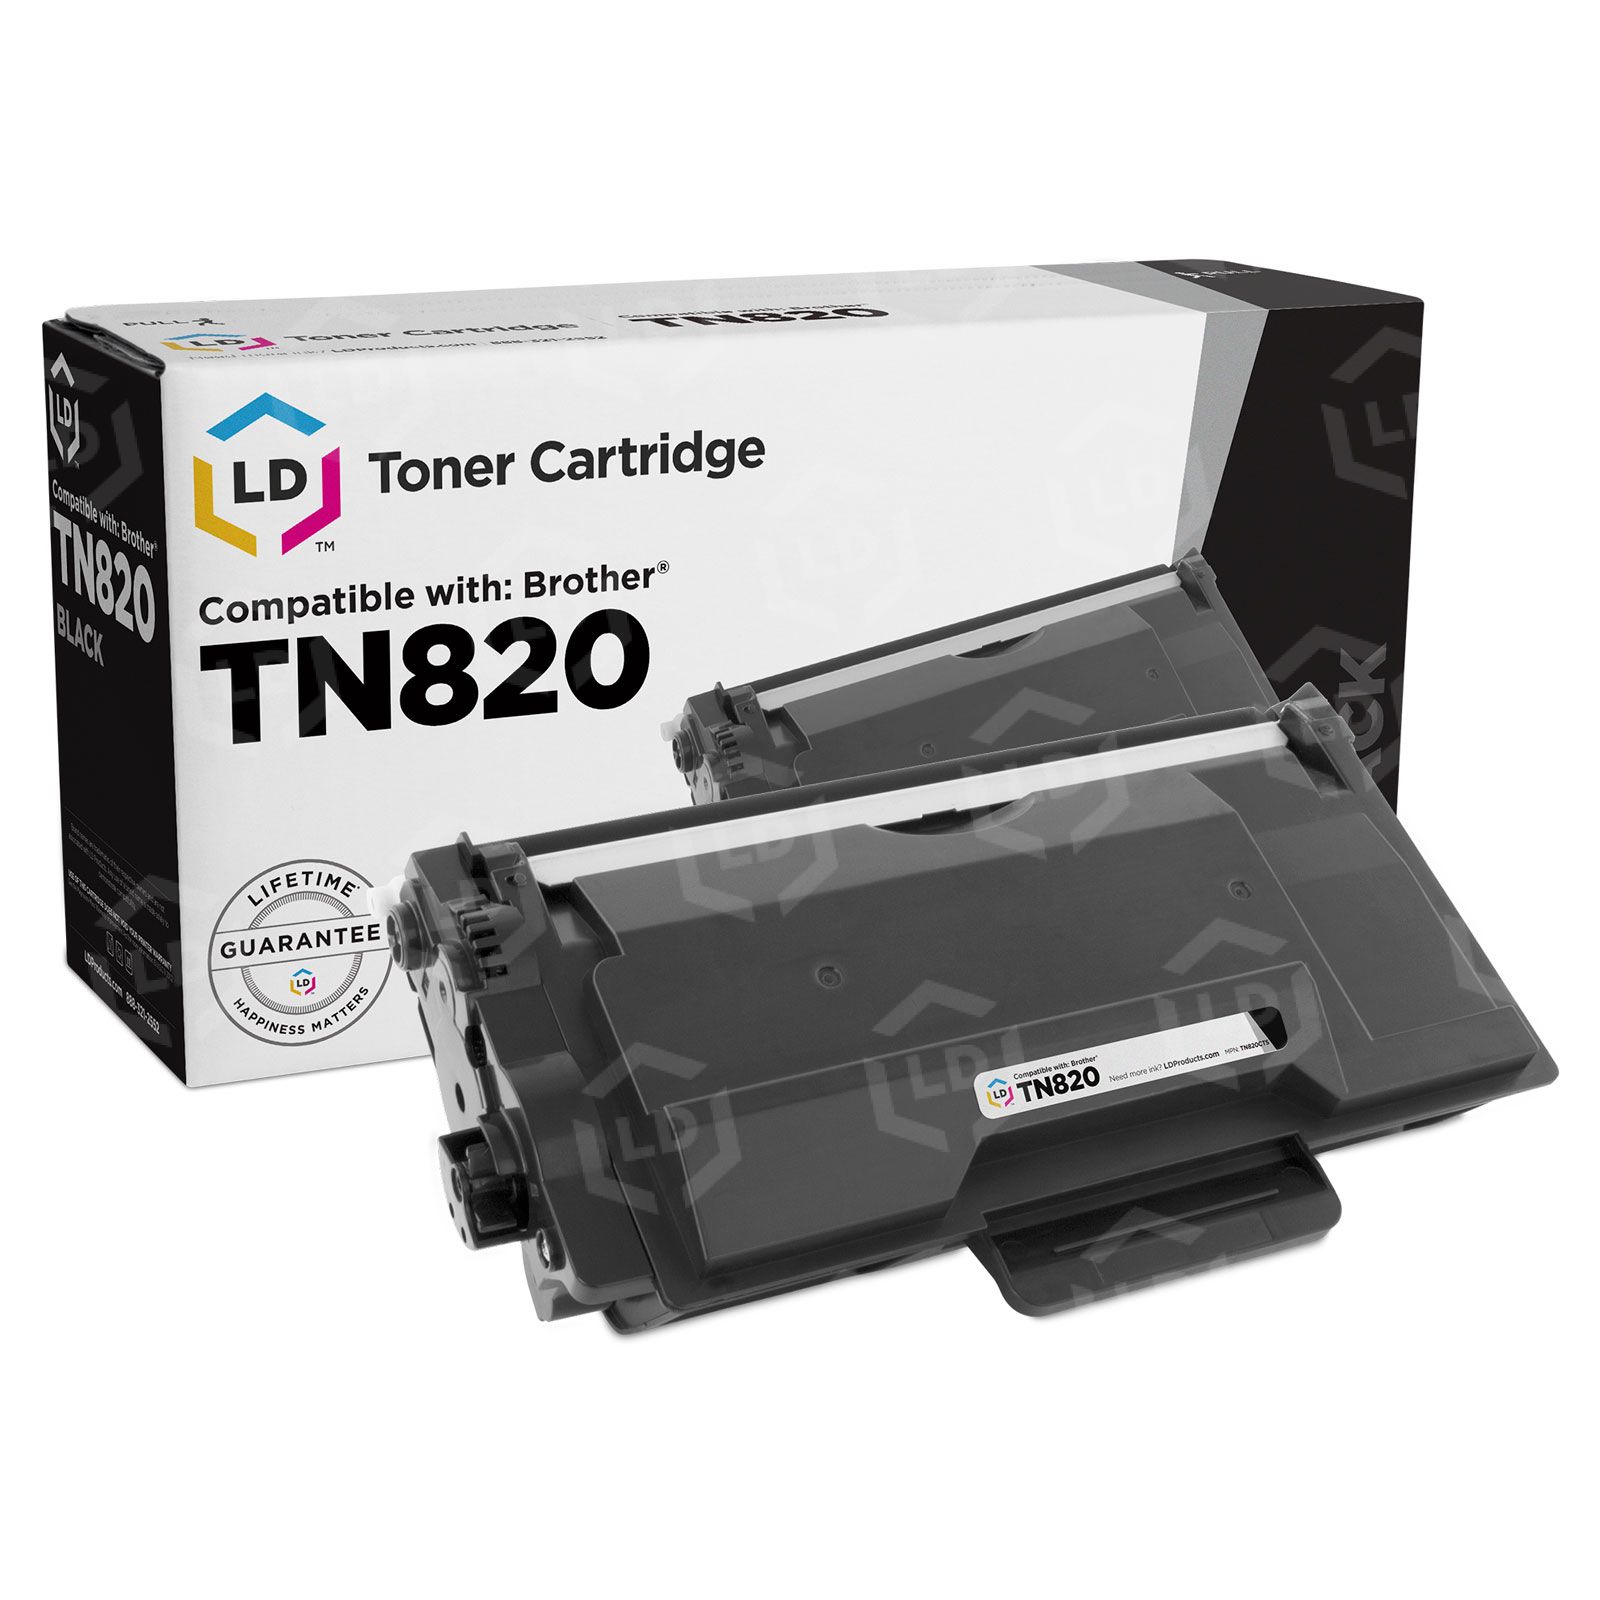 Brother TN820 Black Toner Cartridge - Great Value. A Best-Selling